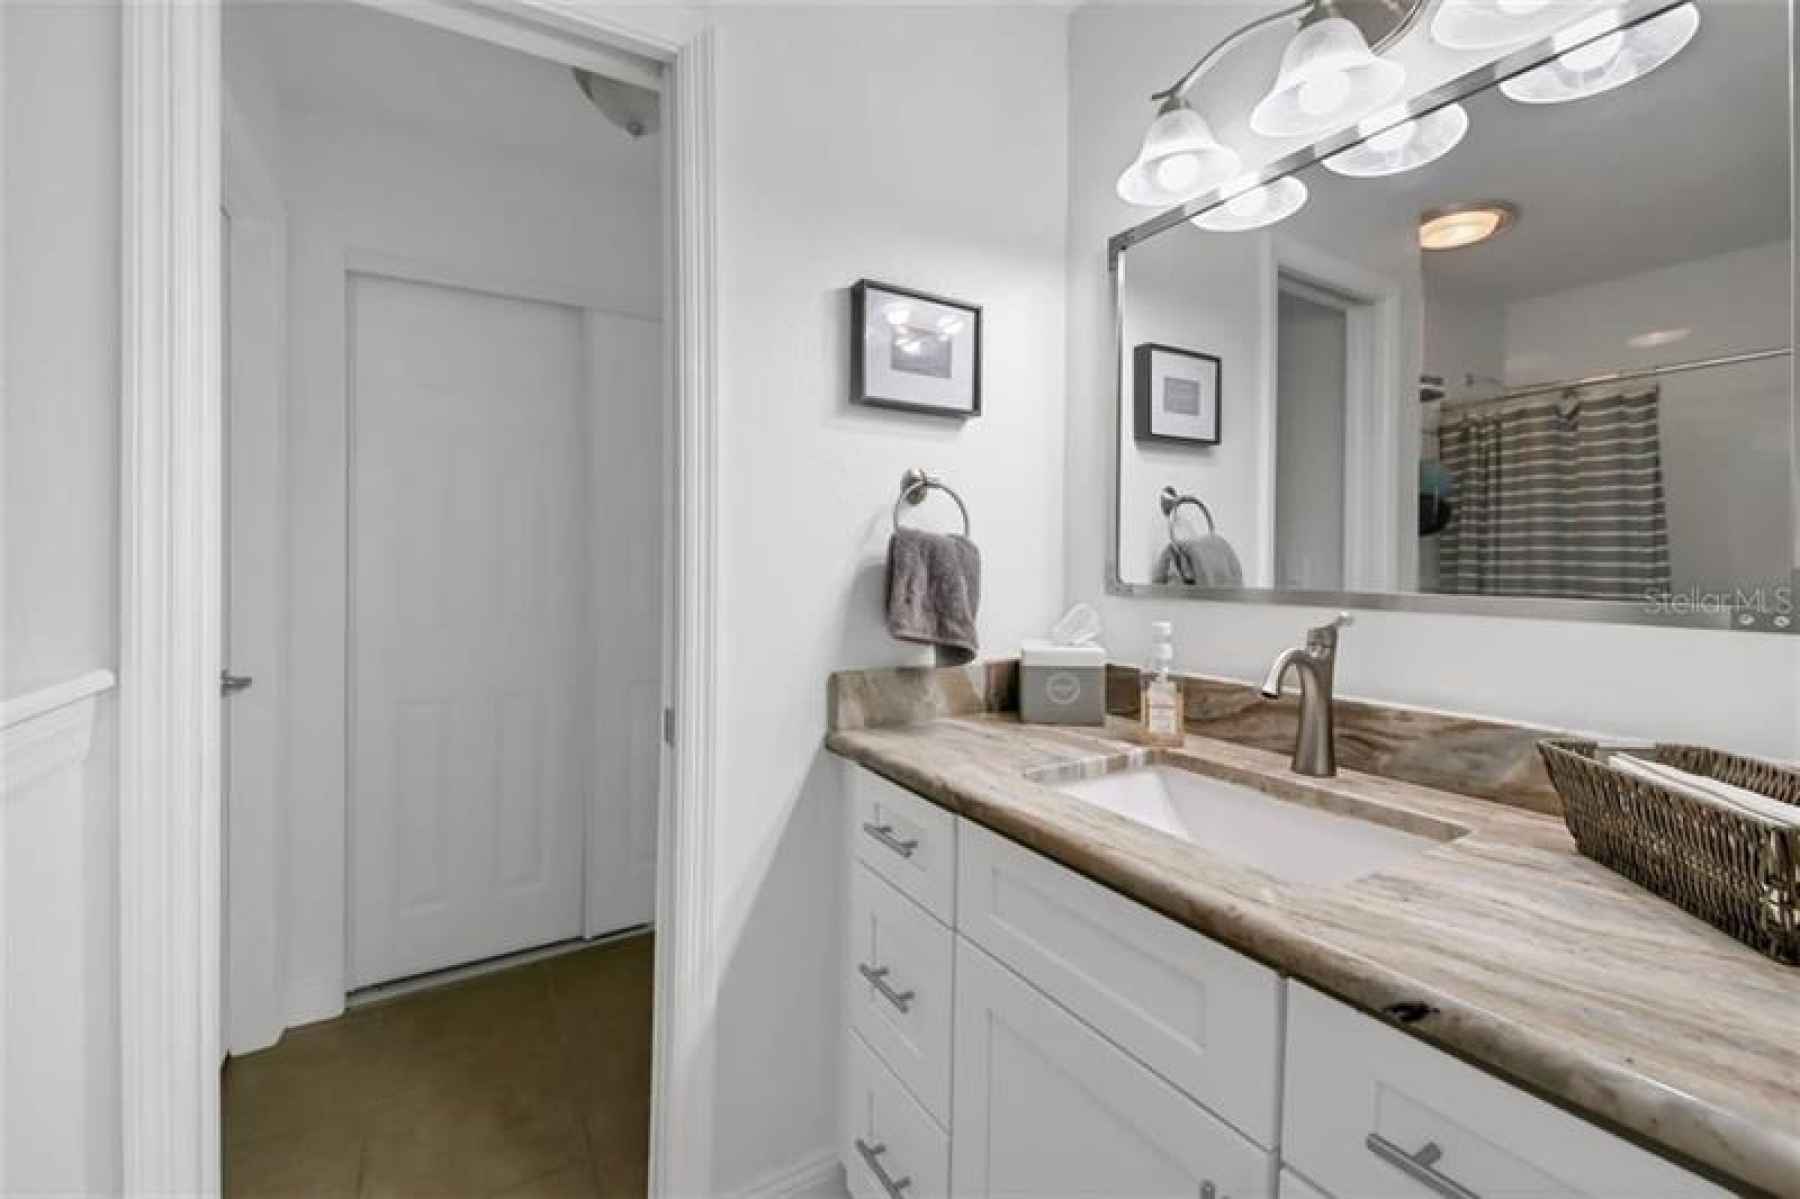 Completely remodeled bathroom with granite counter, new cabinetry, new lighting